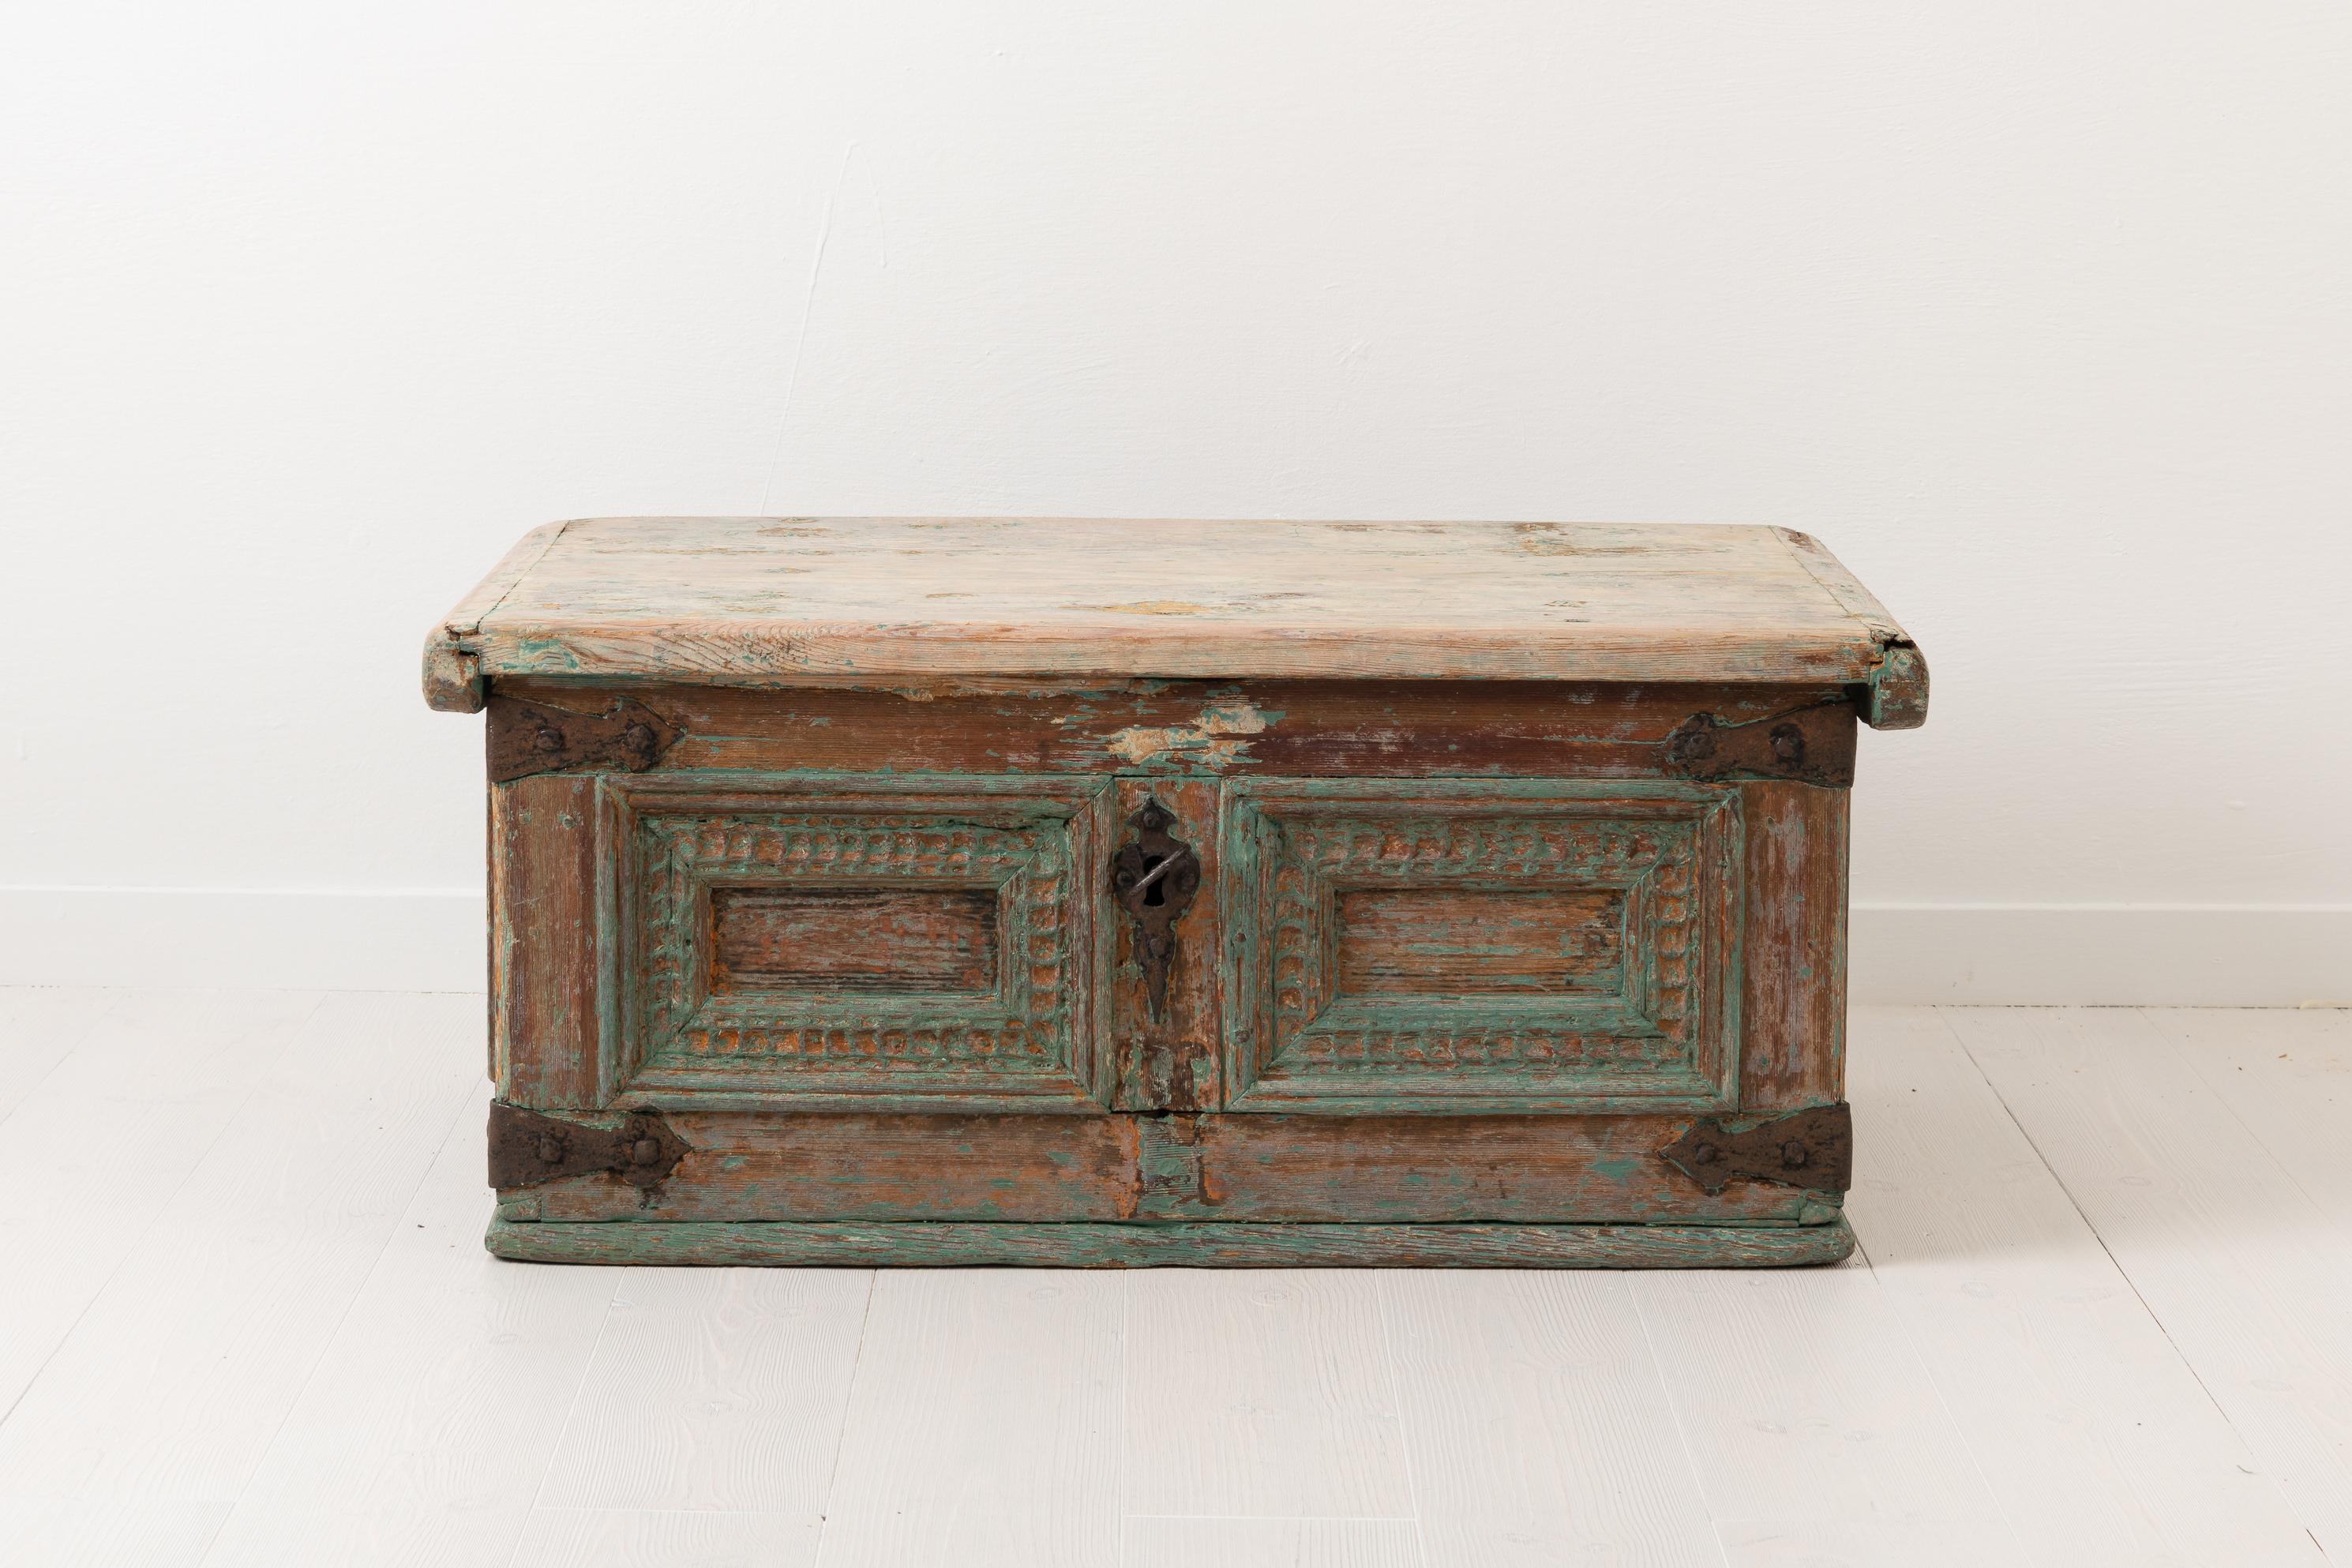 Hand-Crafted Swedish Baroque Chest from the Mid-1700s